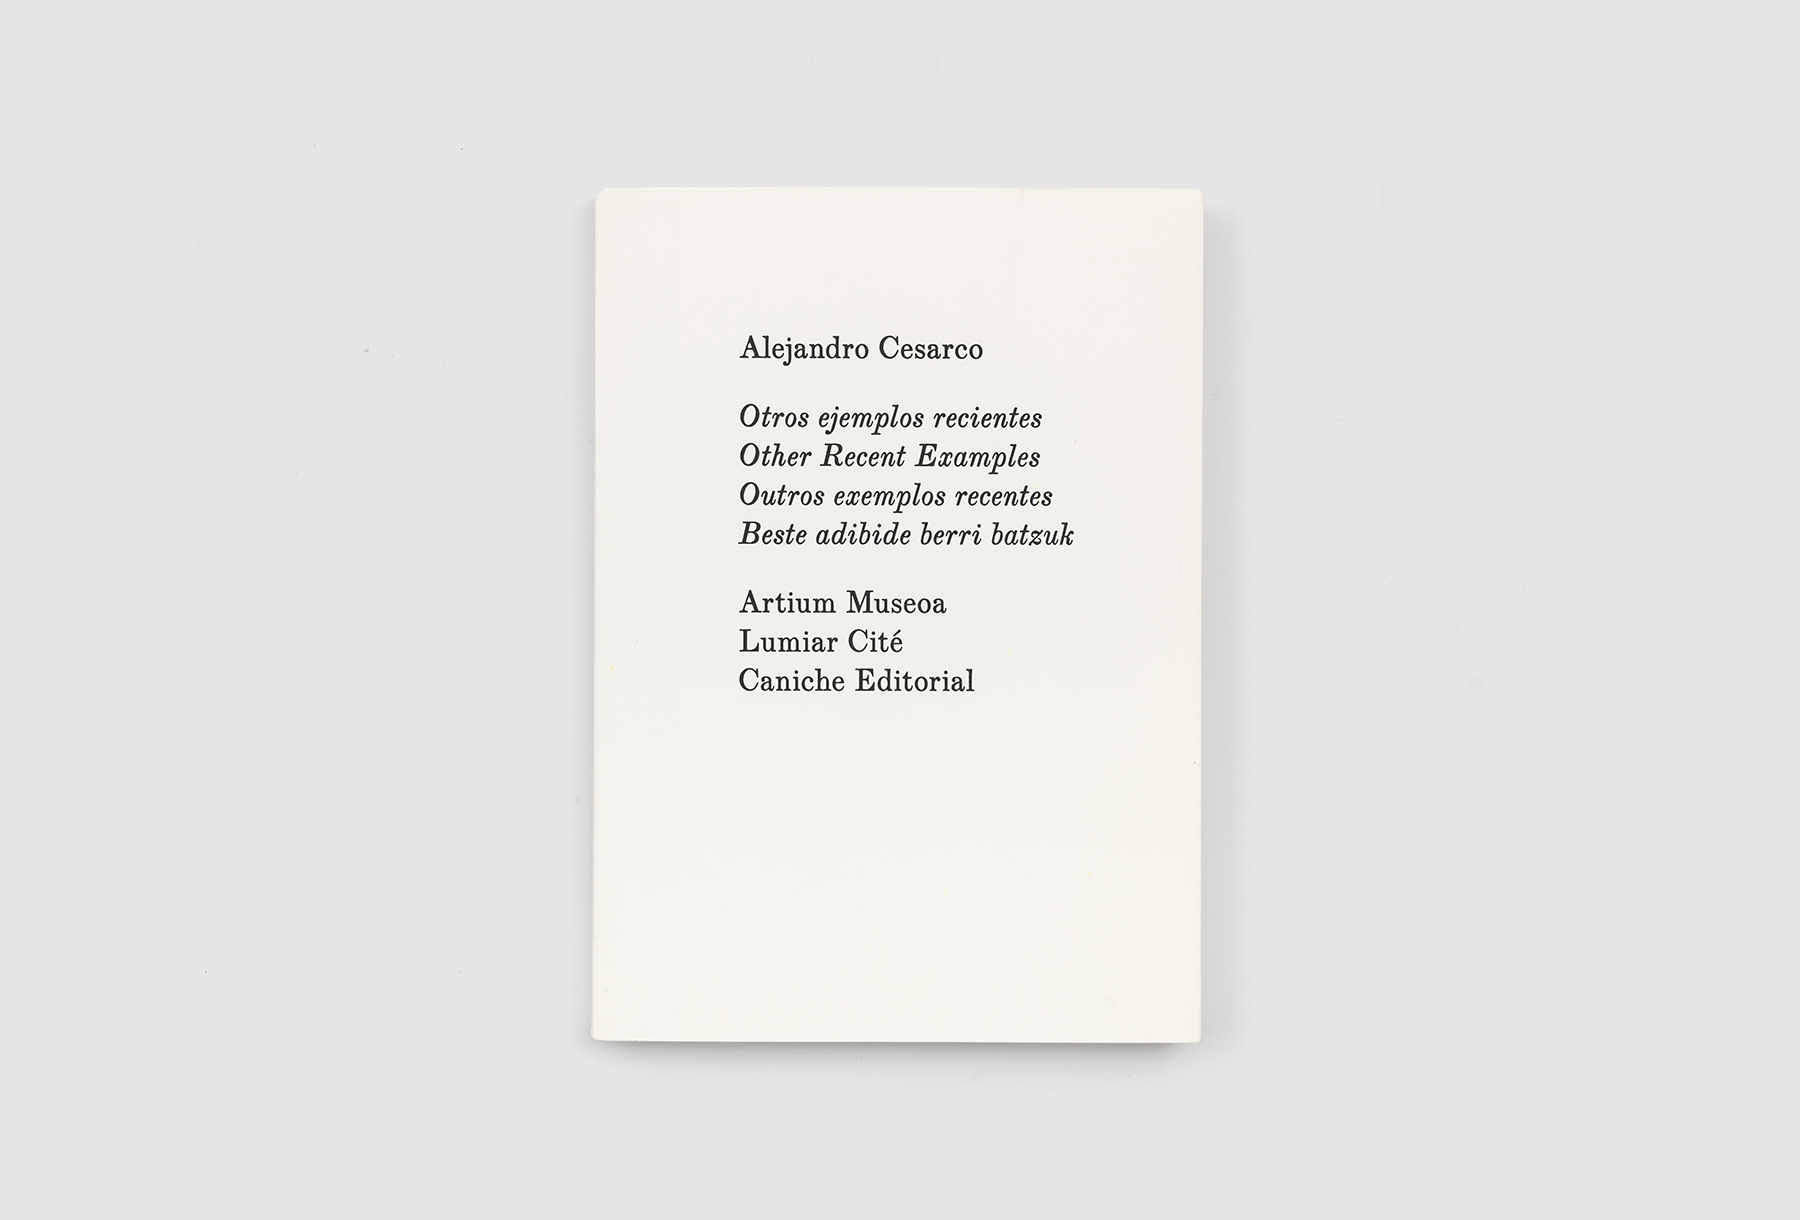 Alejandro Cesarco. Other Recent Examples